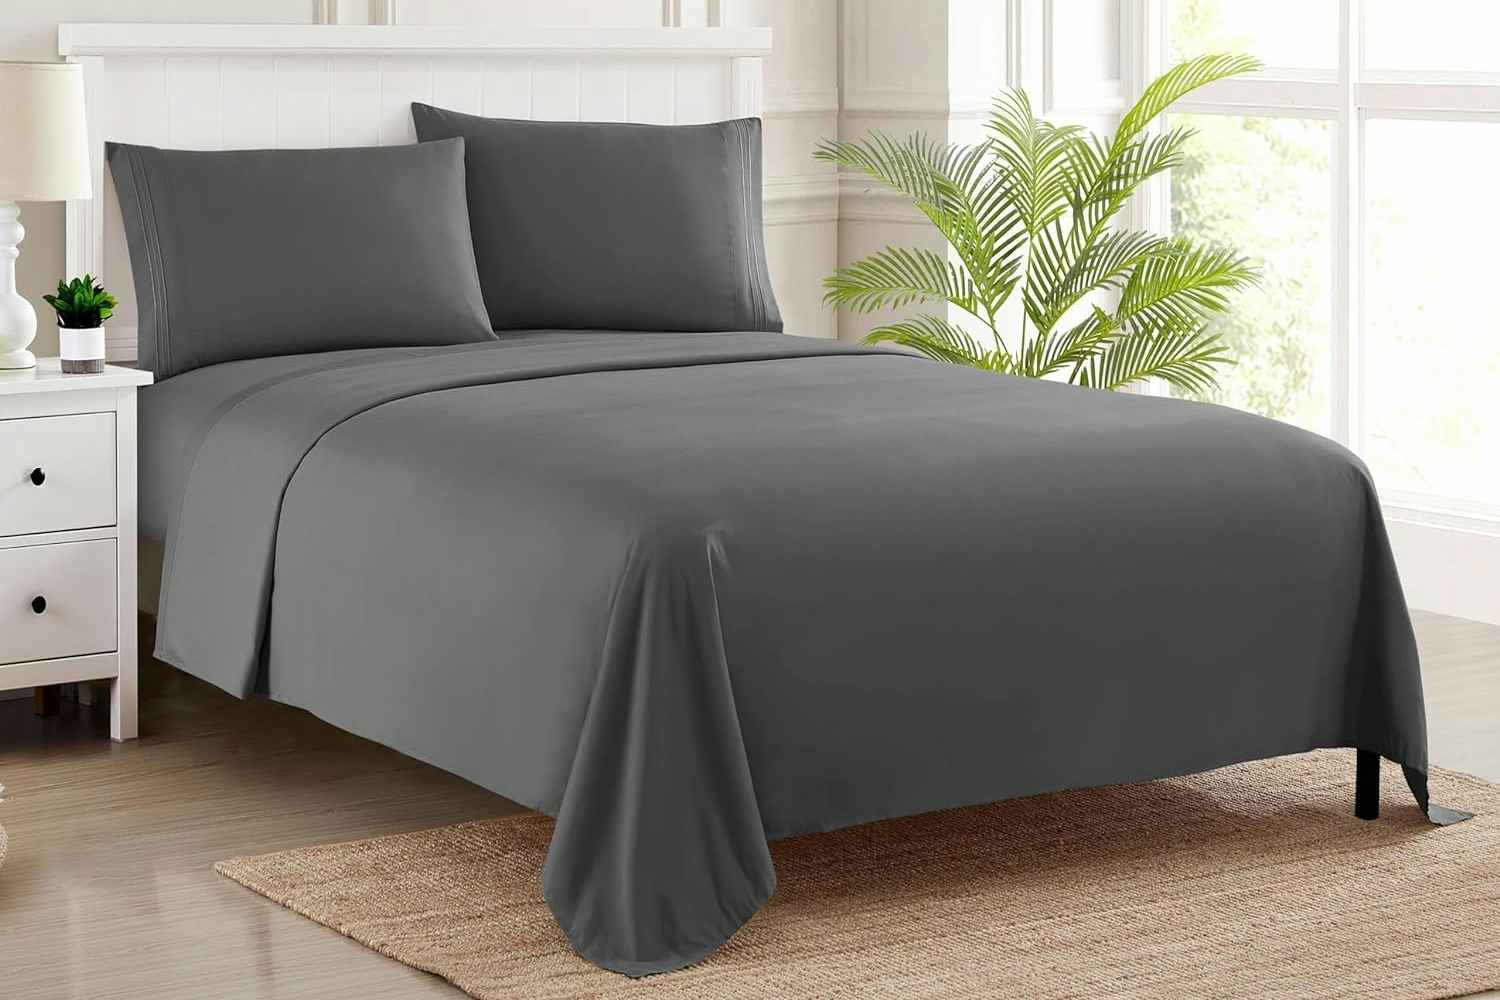 Queen-Size Bed Sheets, Only $8.76 on Amazon